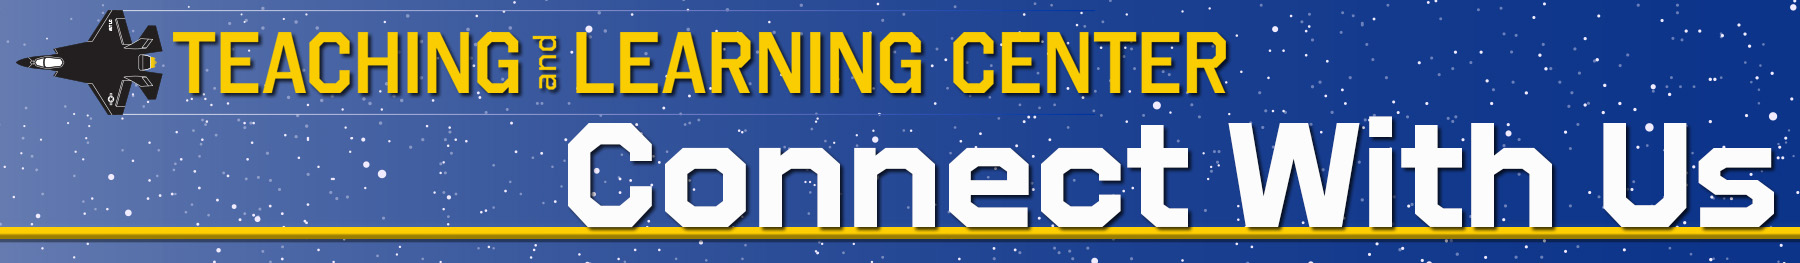 AU Teaching and Learning Center Connect With Us Banner